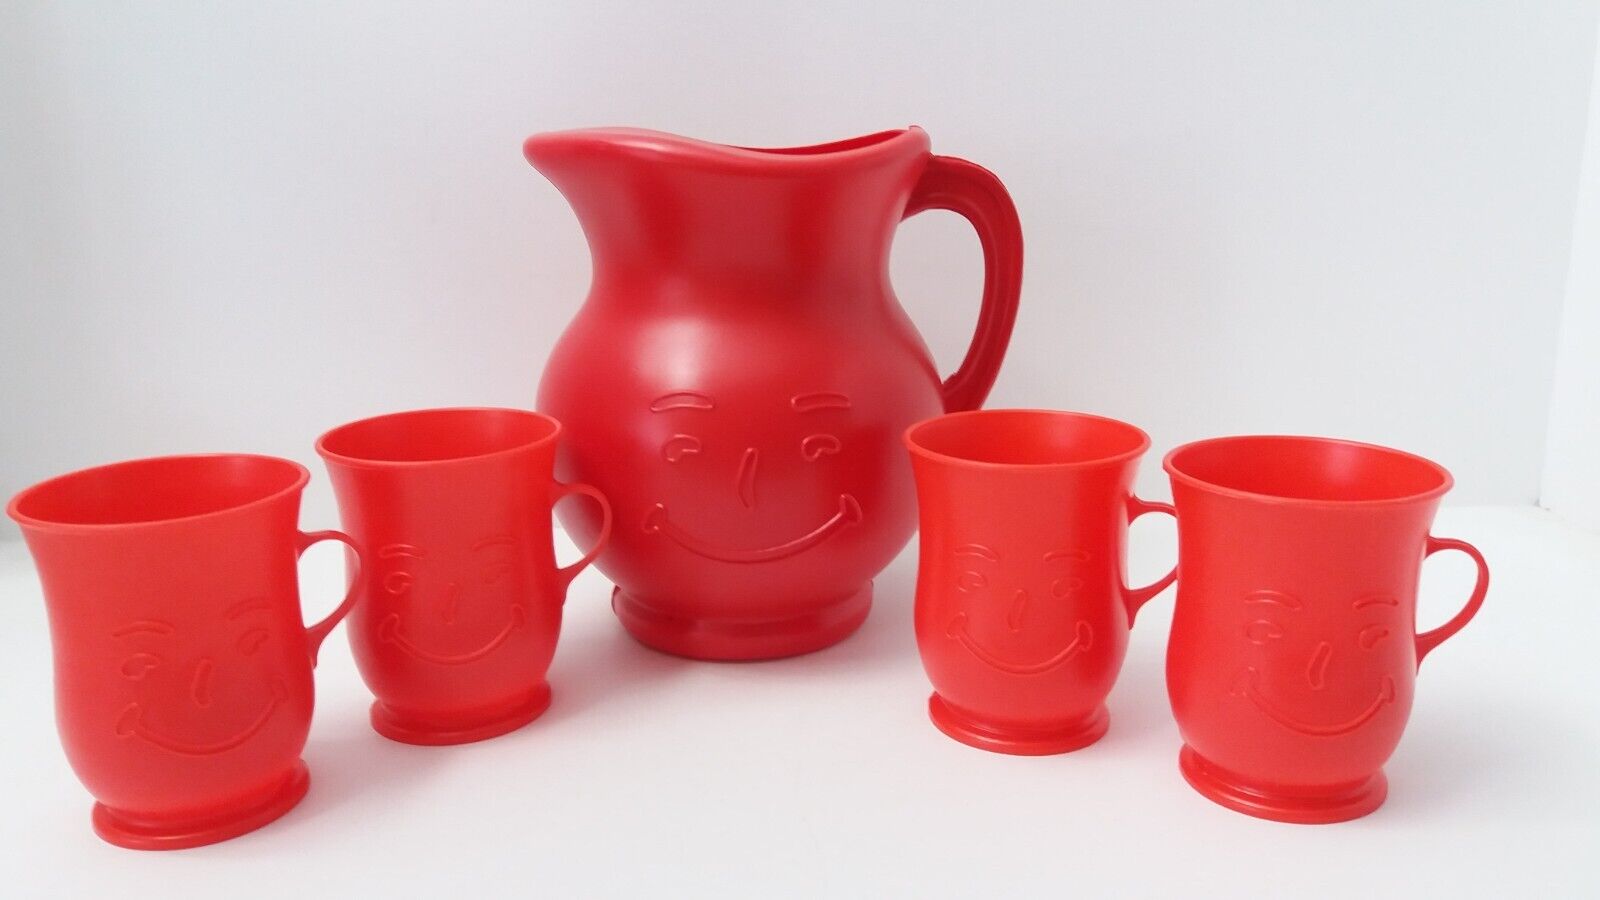 Vintage Kool Aid Red Plastic Pitcher + 4 Cup set - Never used - Oh Yeah